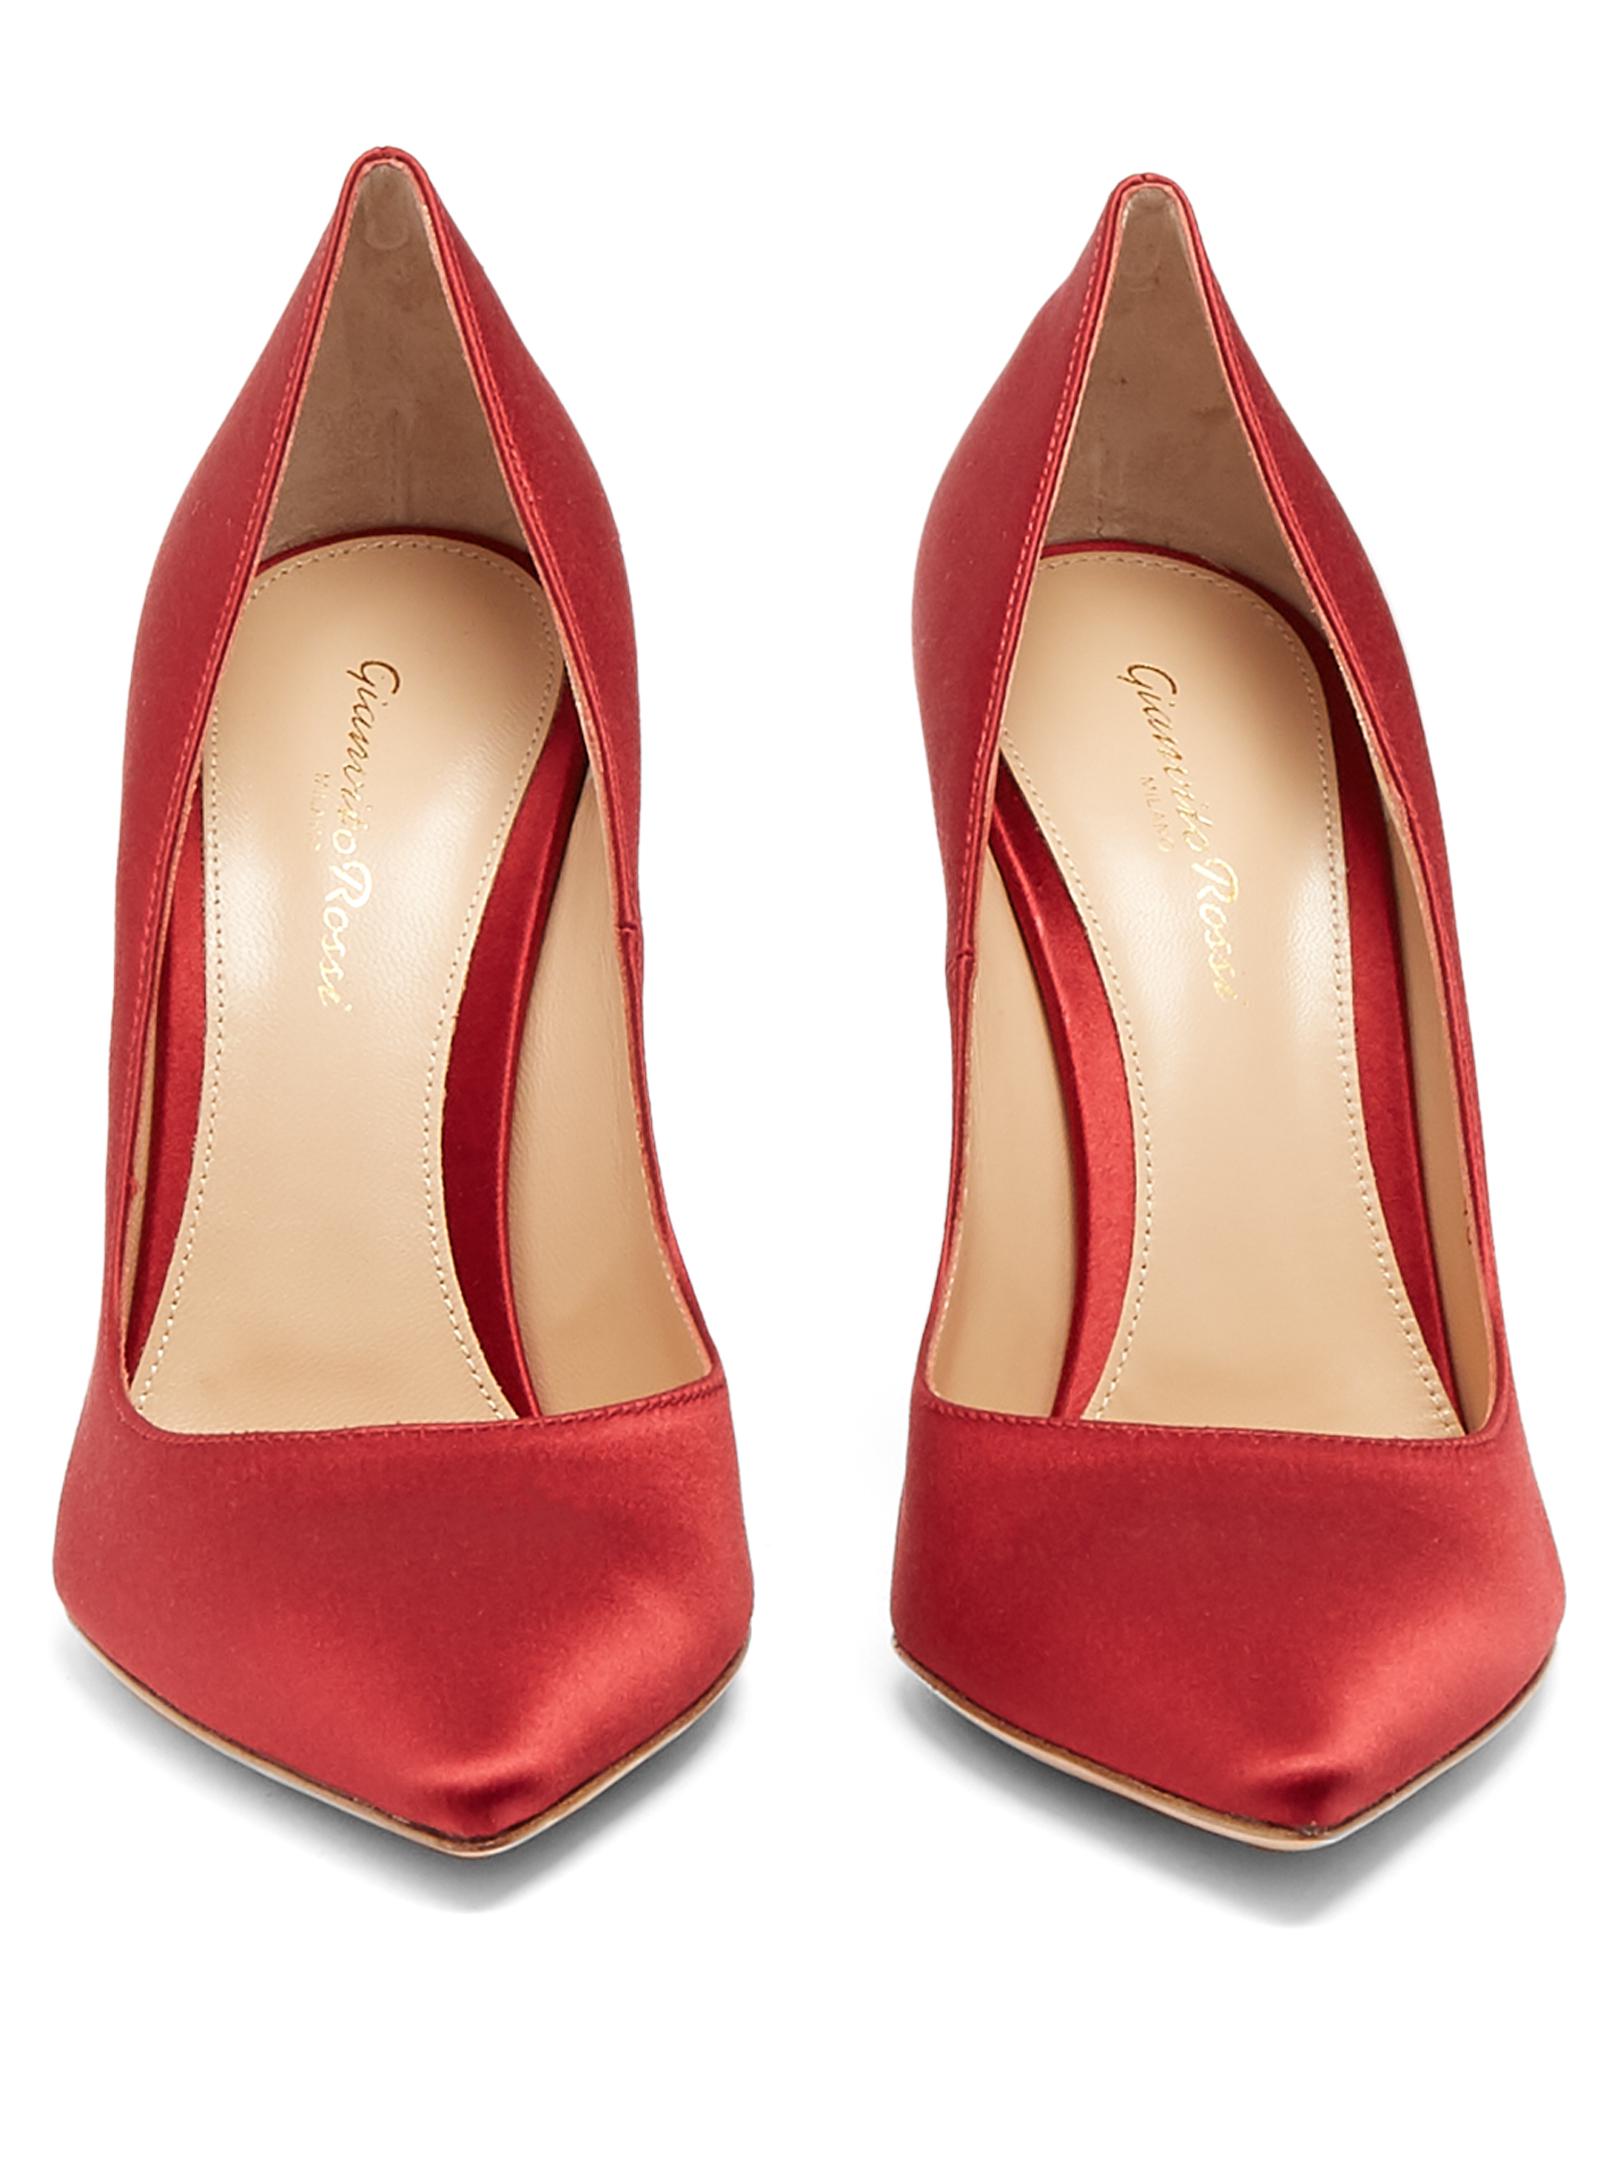 Gianvito Rossi 100mm Point-toe Satin Pumps in Dark Red (Red) - Lyst